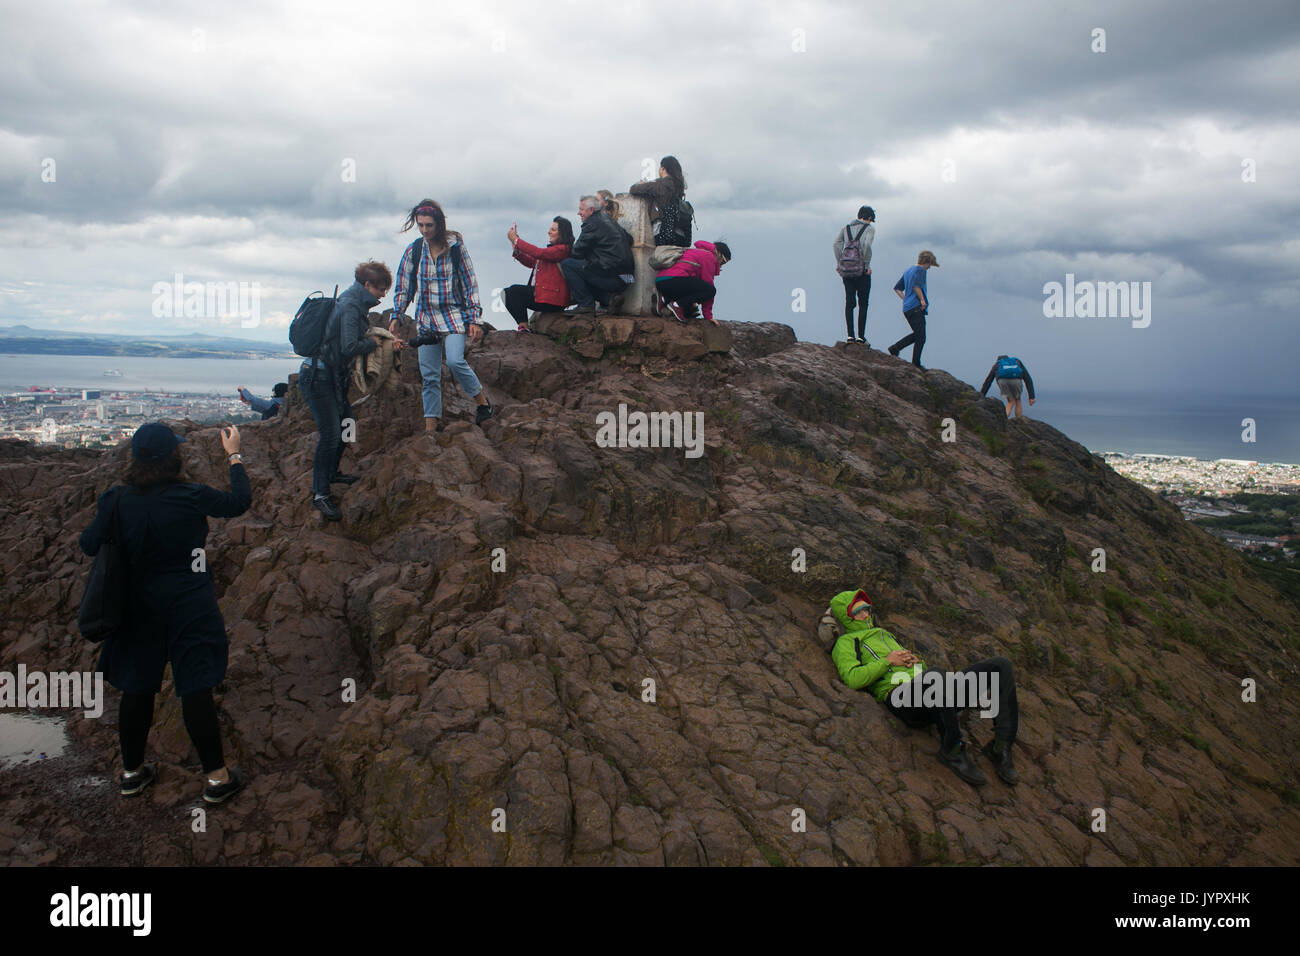 Visitors crowd together on the top of the peak. The peak of King Arthur's Seat is a popular destination for both locals and tourists. The peak and sur Stock Photo